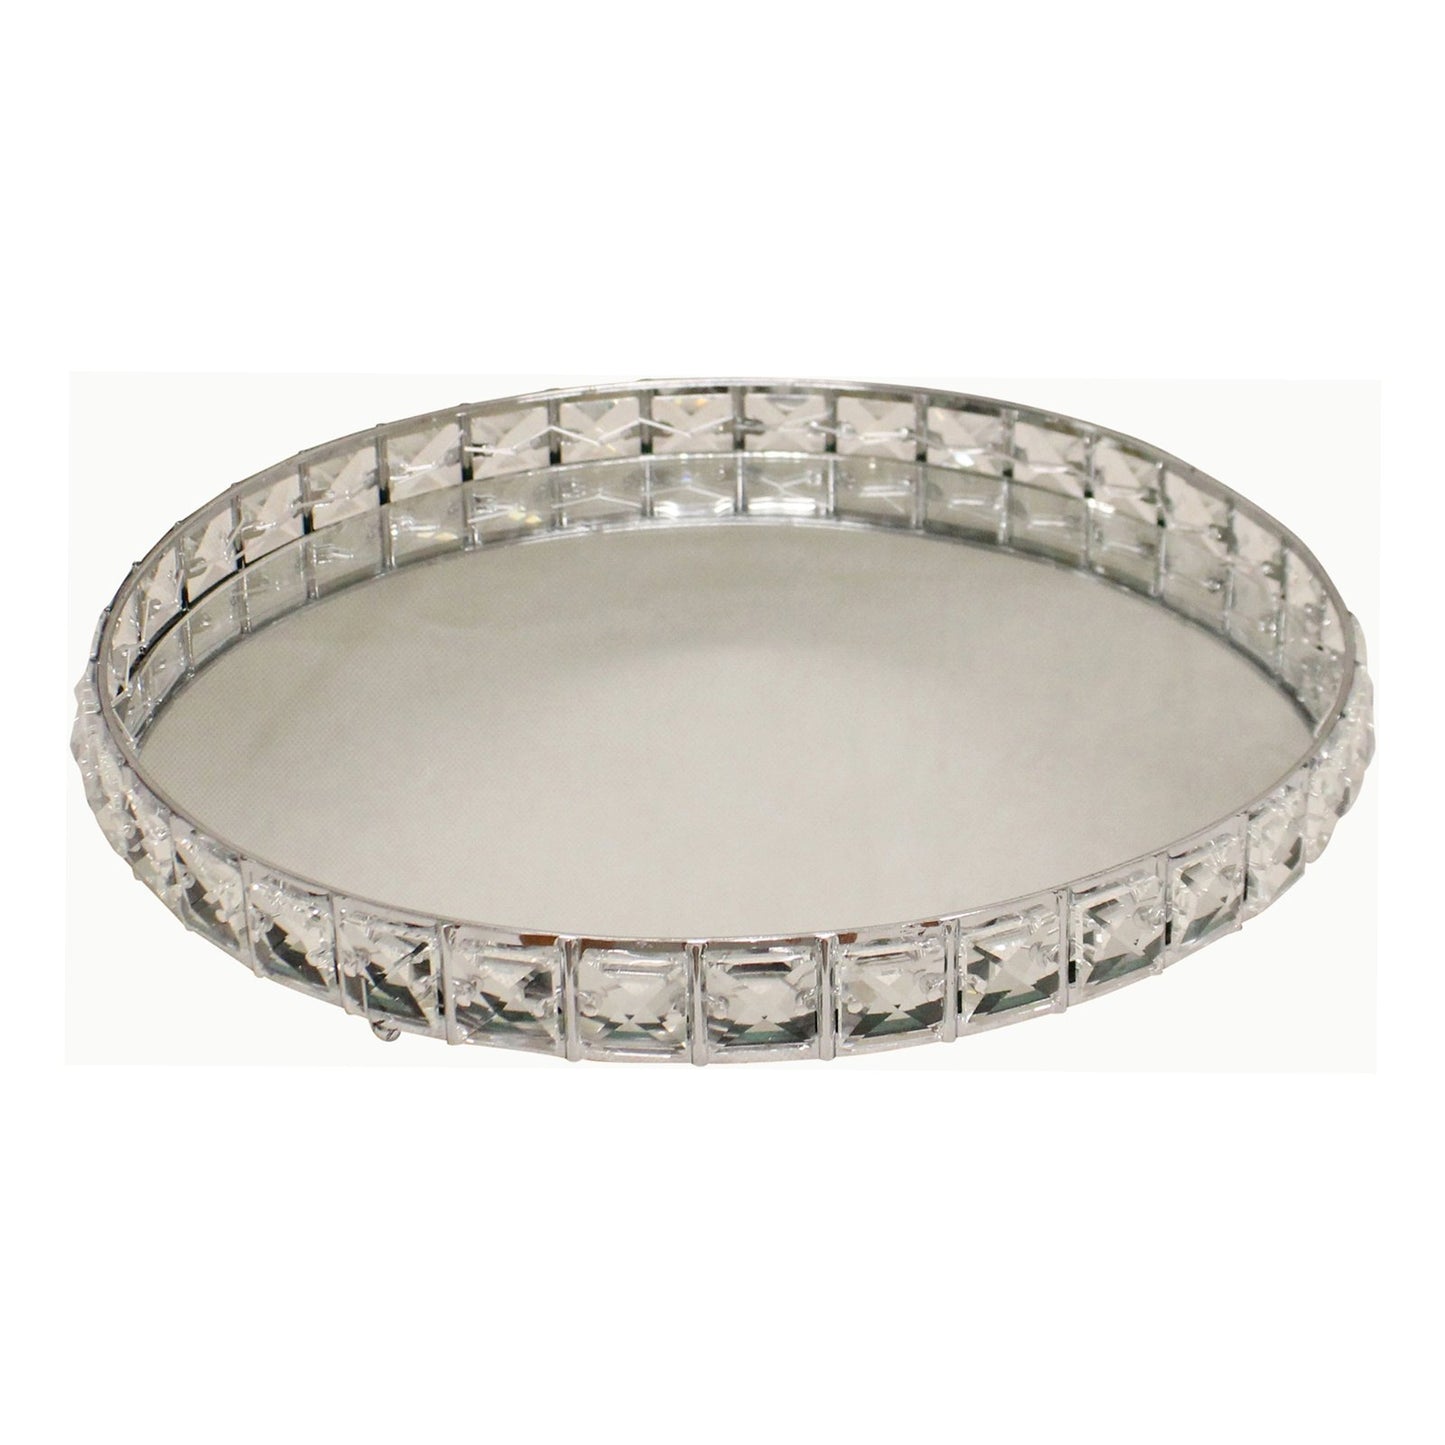 Large Mirrored Silver Tray With Bead Design, 31cm